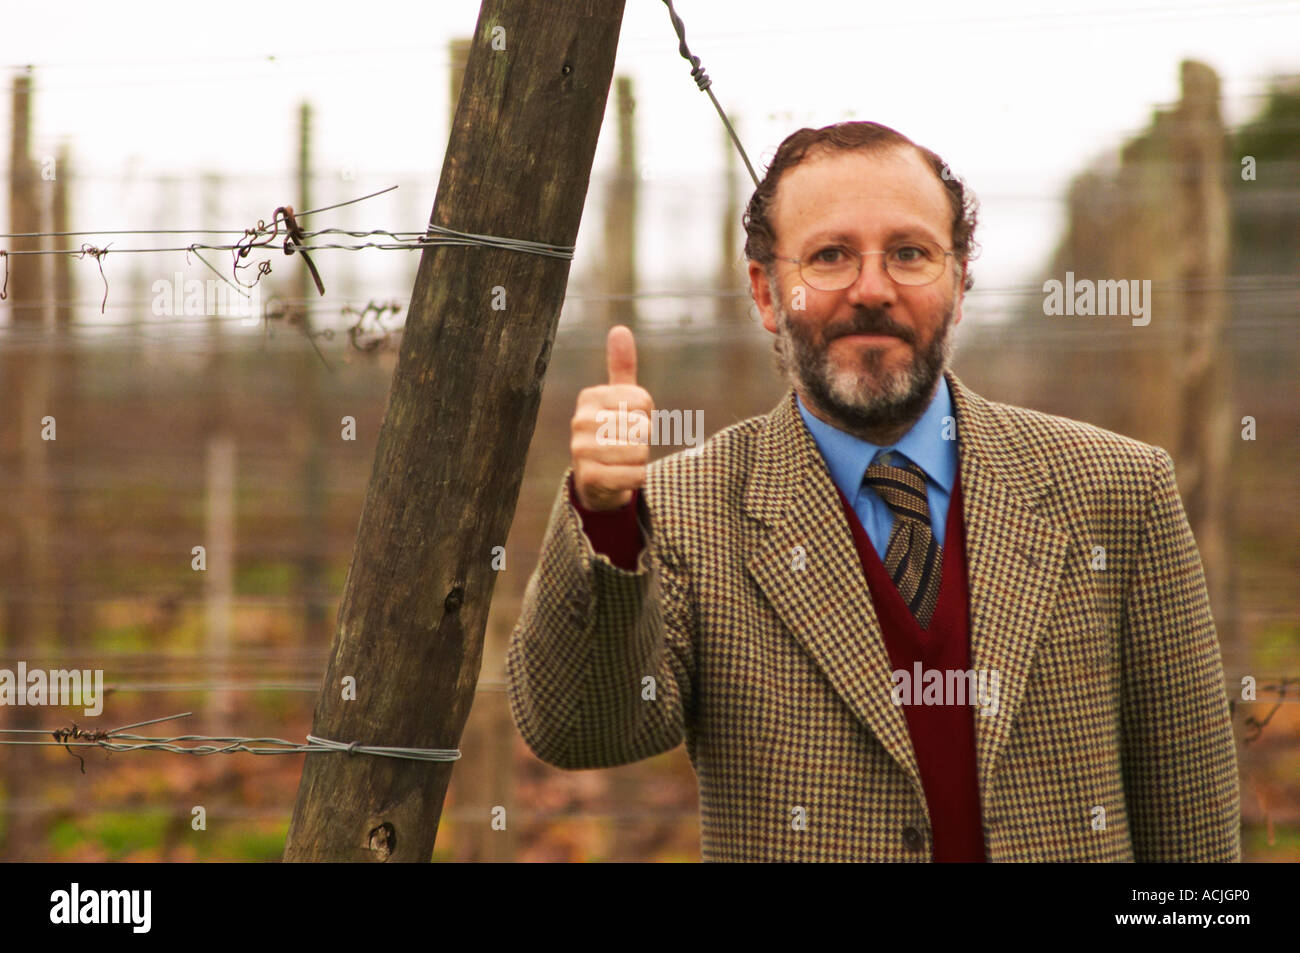 Juan Luis Bouza, owner in front of one of his Tannat vineyards. giving the thumbs up sign. Bodega Bouza Winery, Canelones, Montevideo, Uruguay, South America Stock Photo